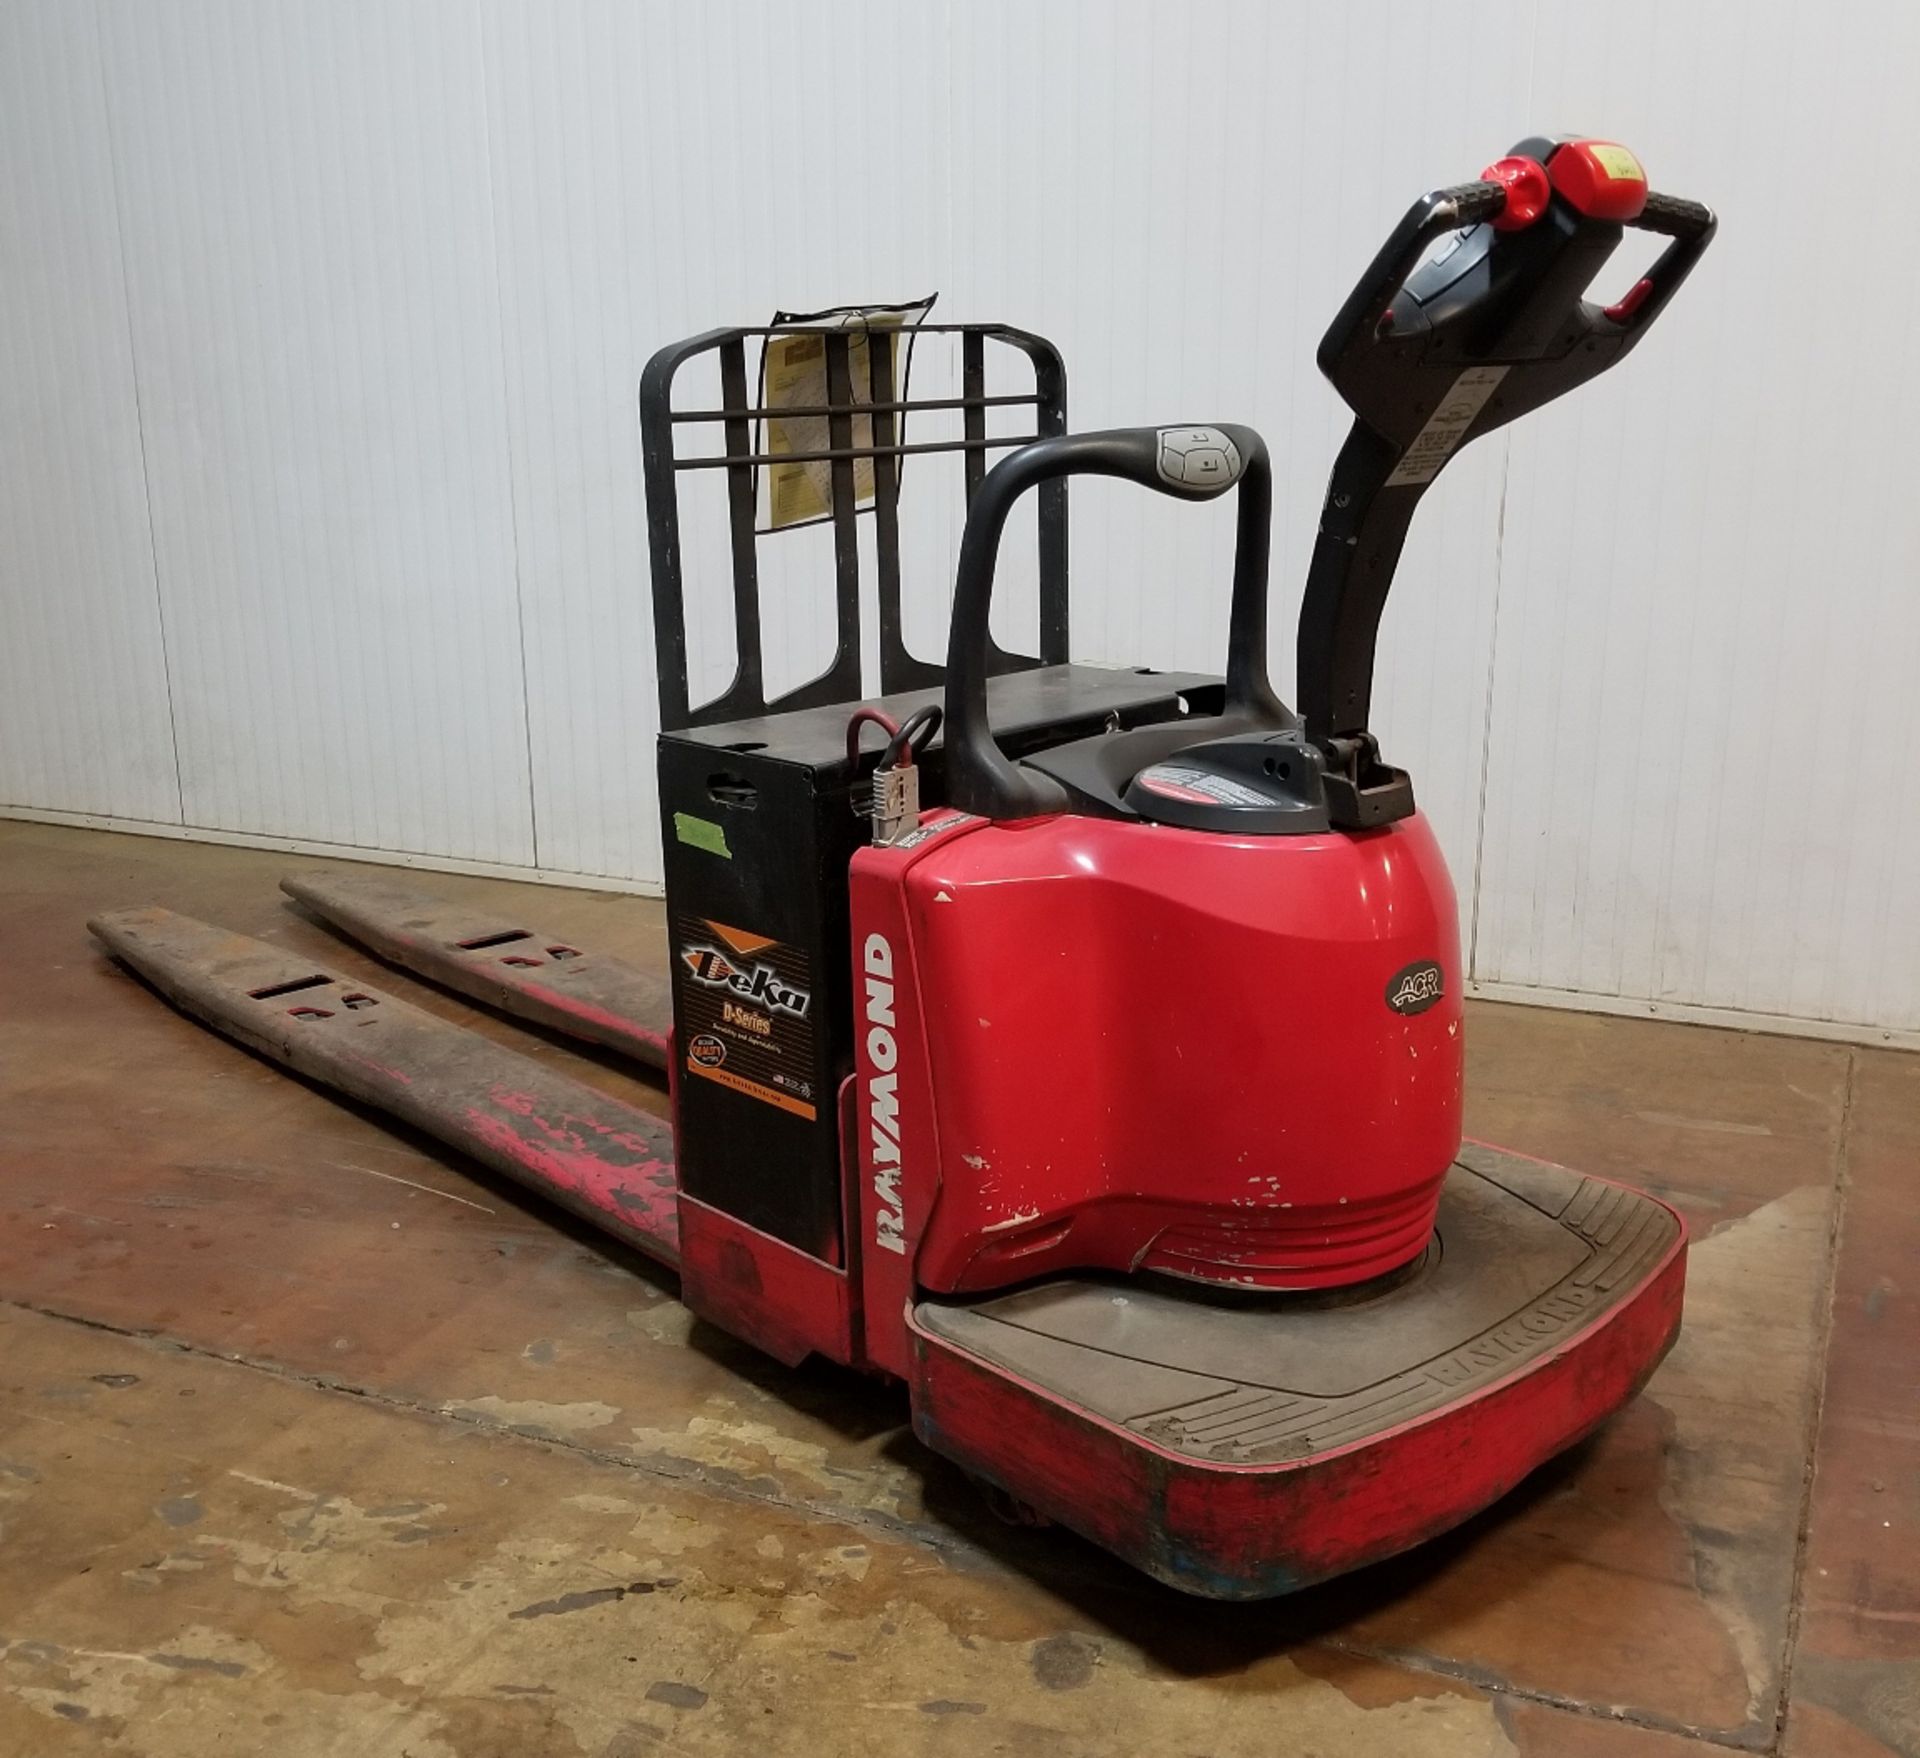 RAYMOND (2011) 8400 24V ELECTRIC RIDE-ON PALLET JACK WITH 8000 LB. CAPACITY, 5622 HRS (RECORDED AT